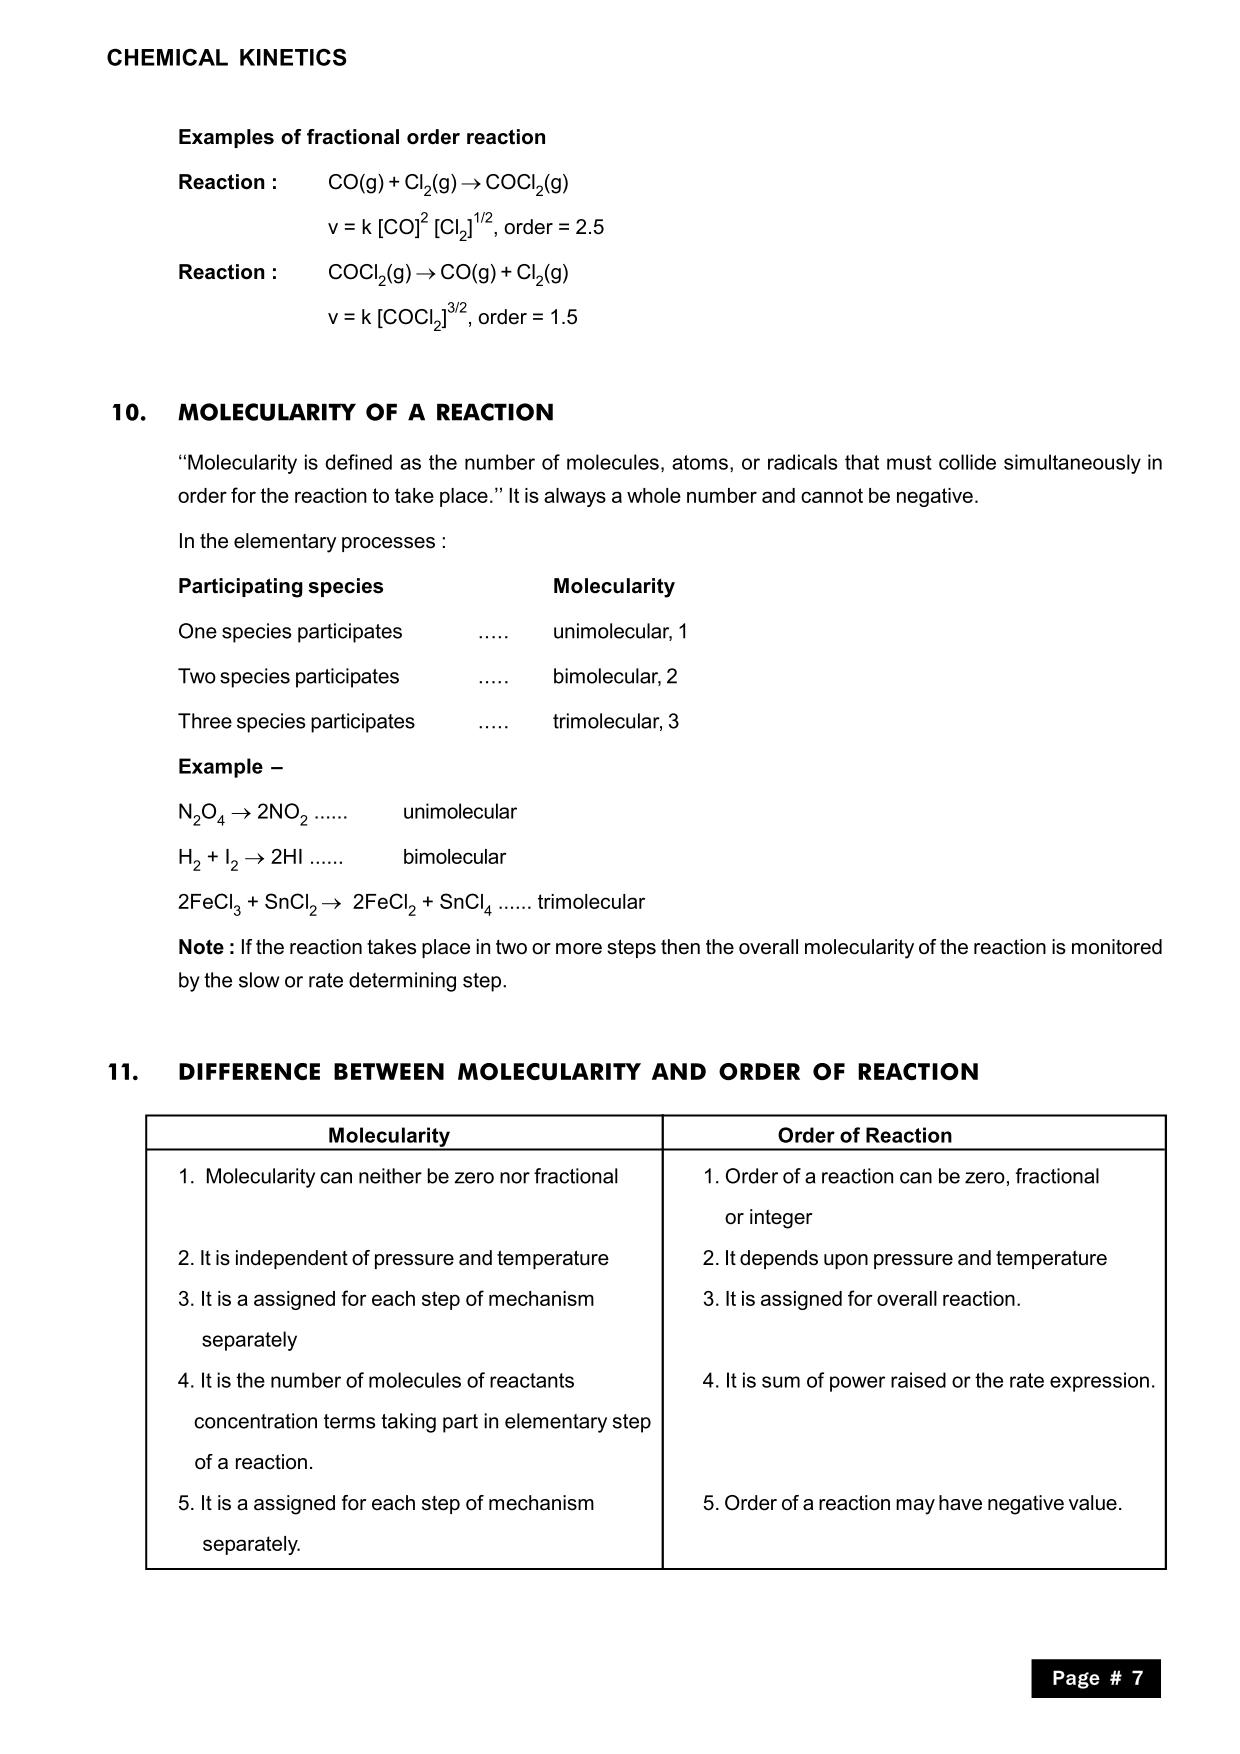 Chemical Kinetics Class 12 Notes: Molecularity 